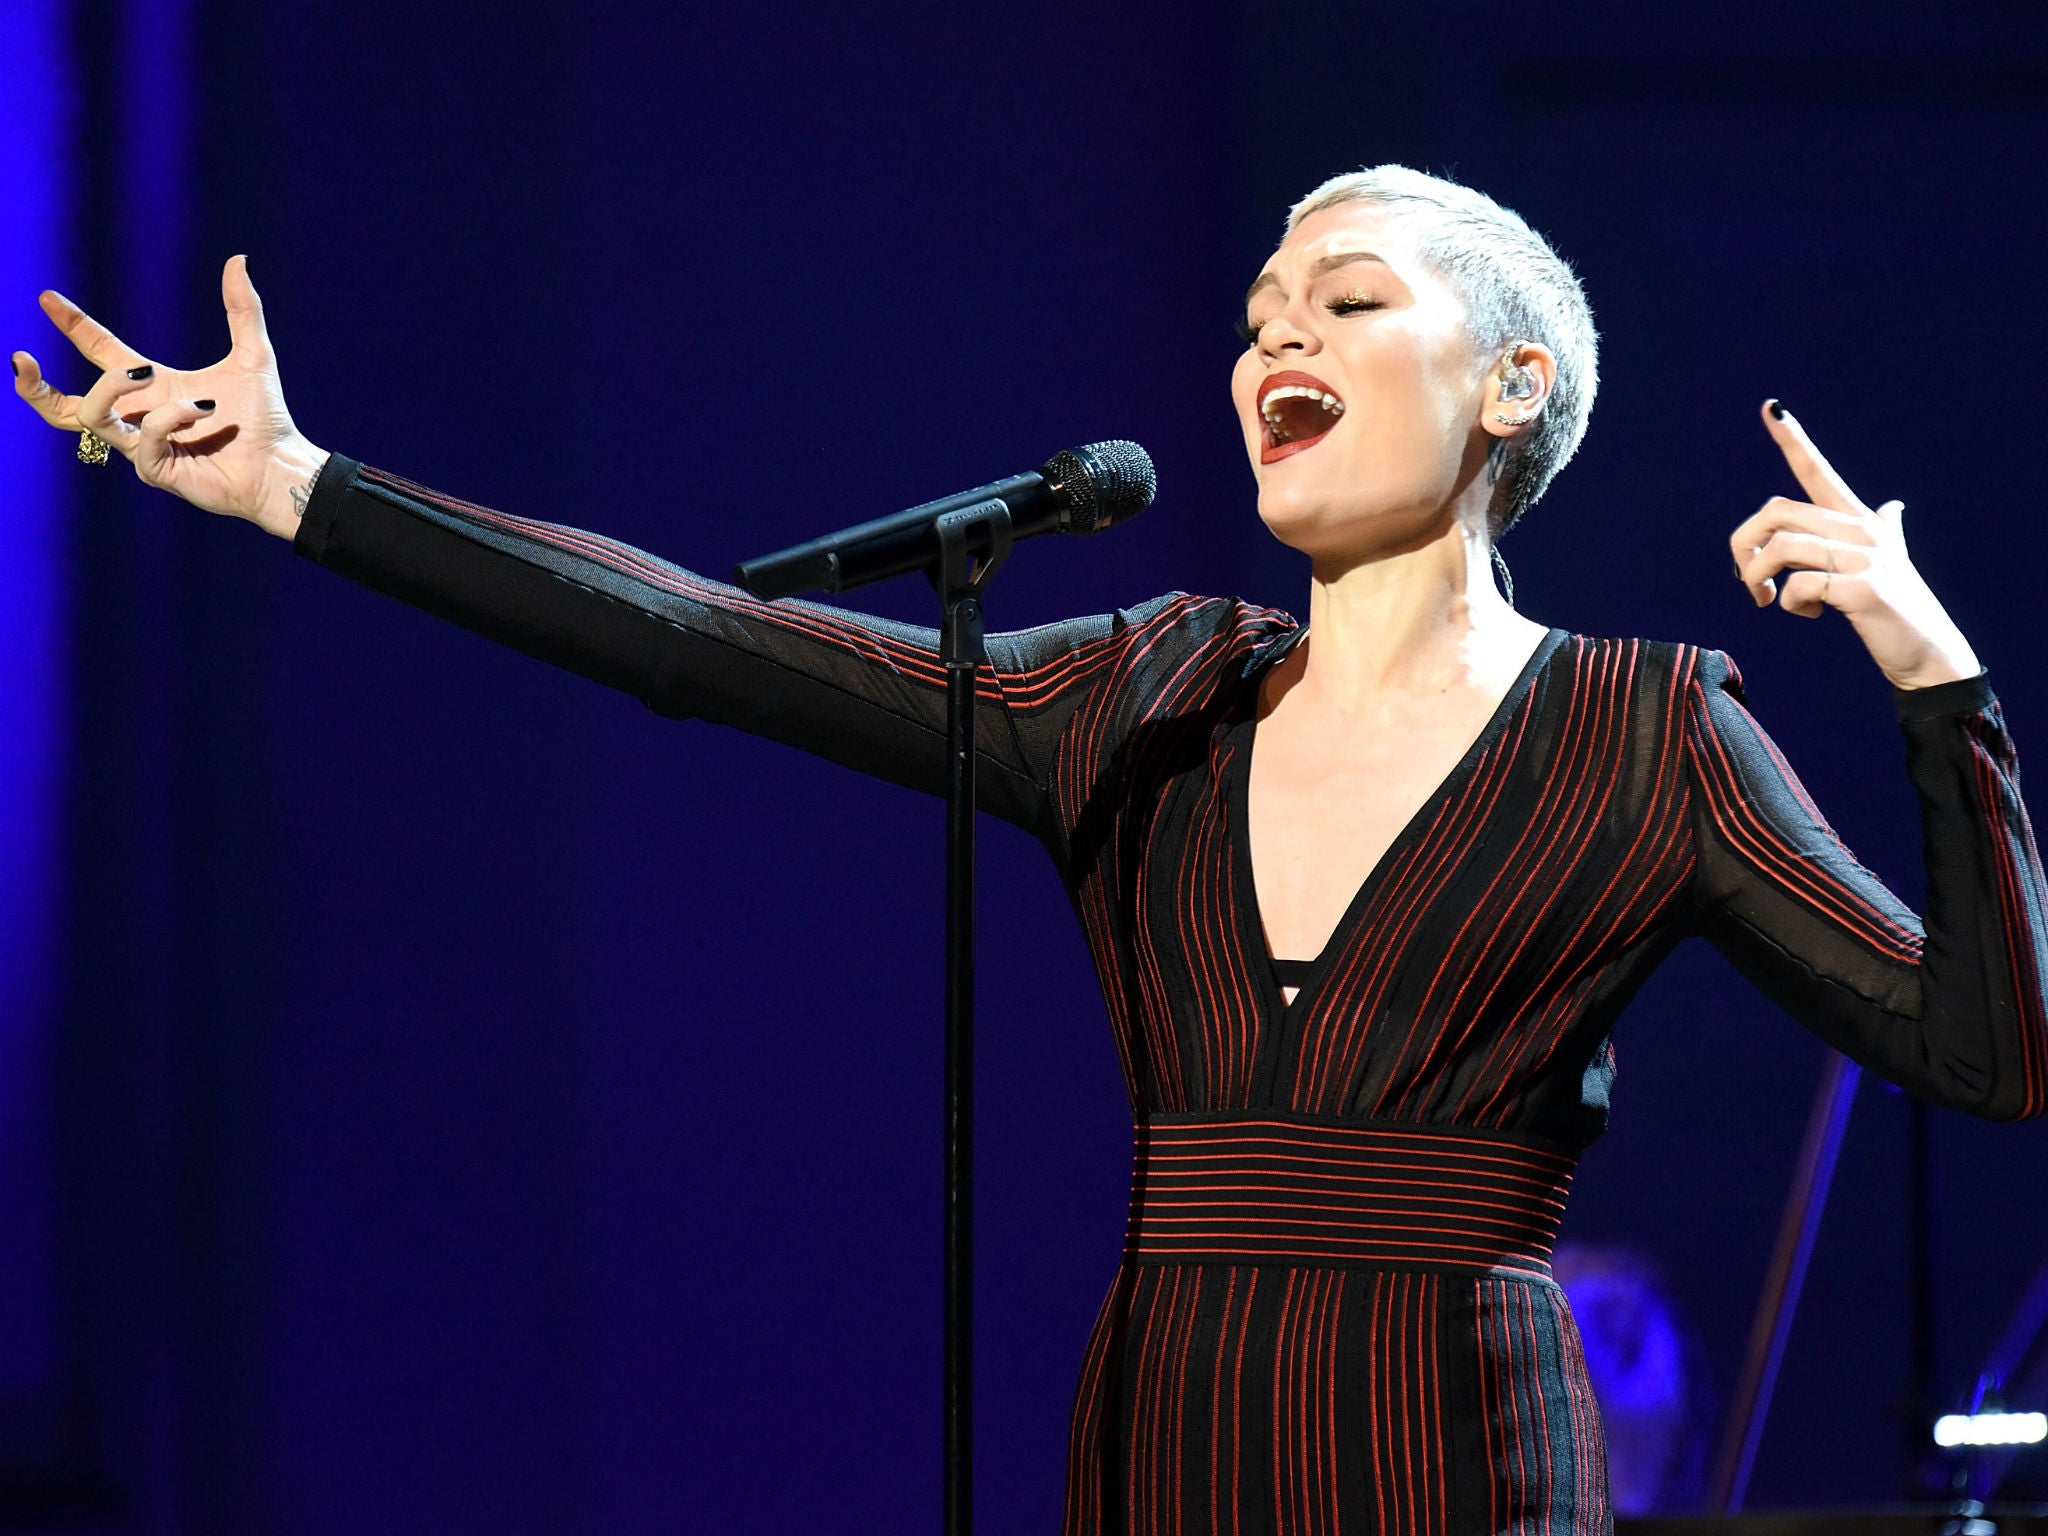 Jessie J has had number one singles in the UK but feels the US appreciate her talent more